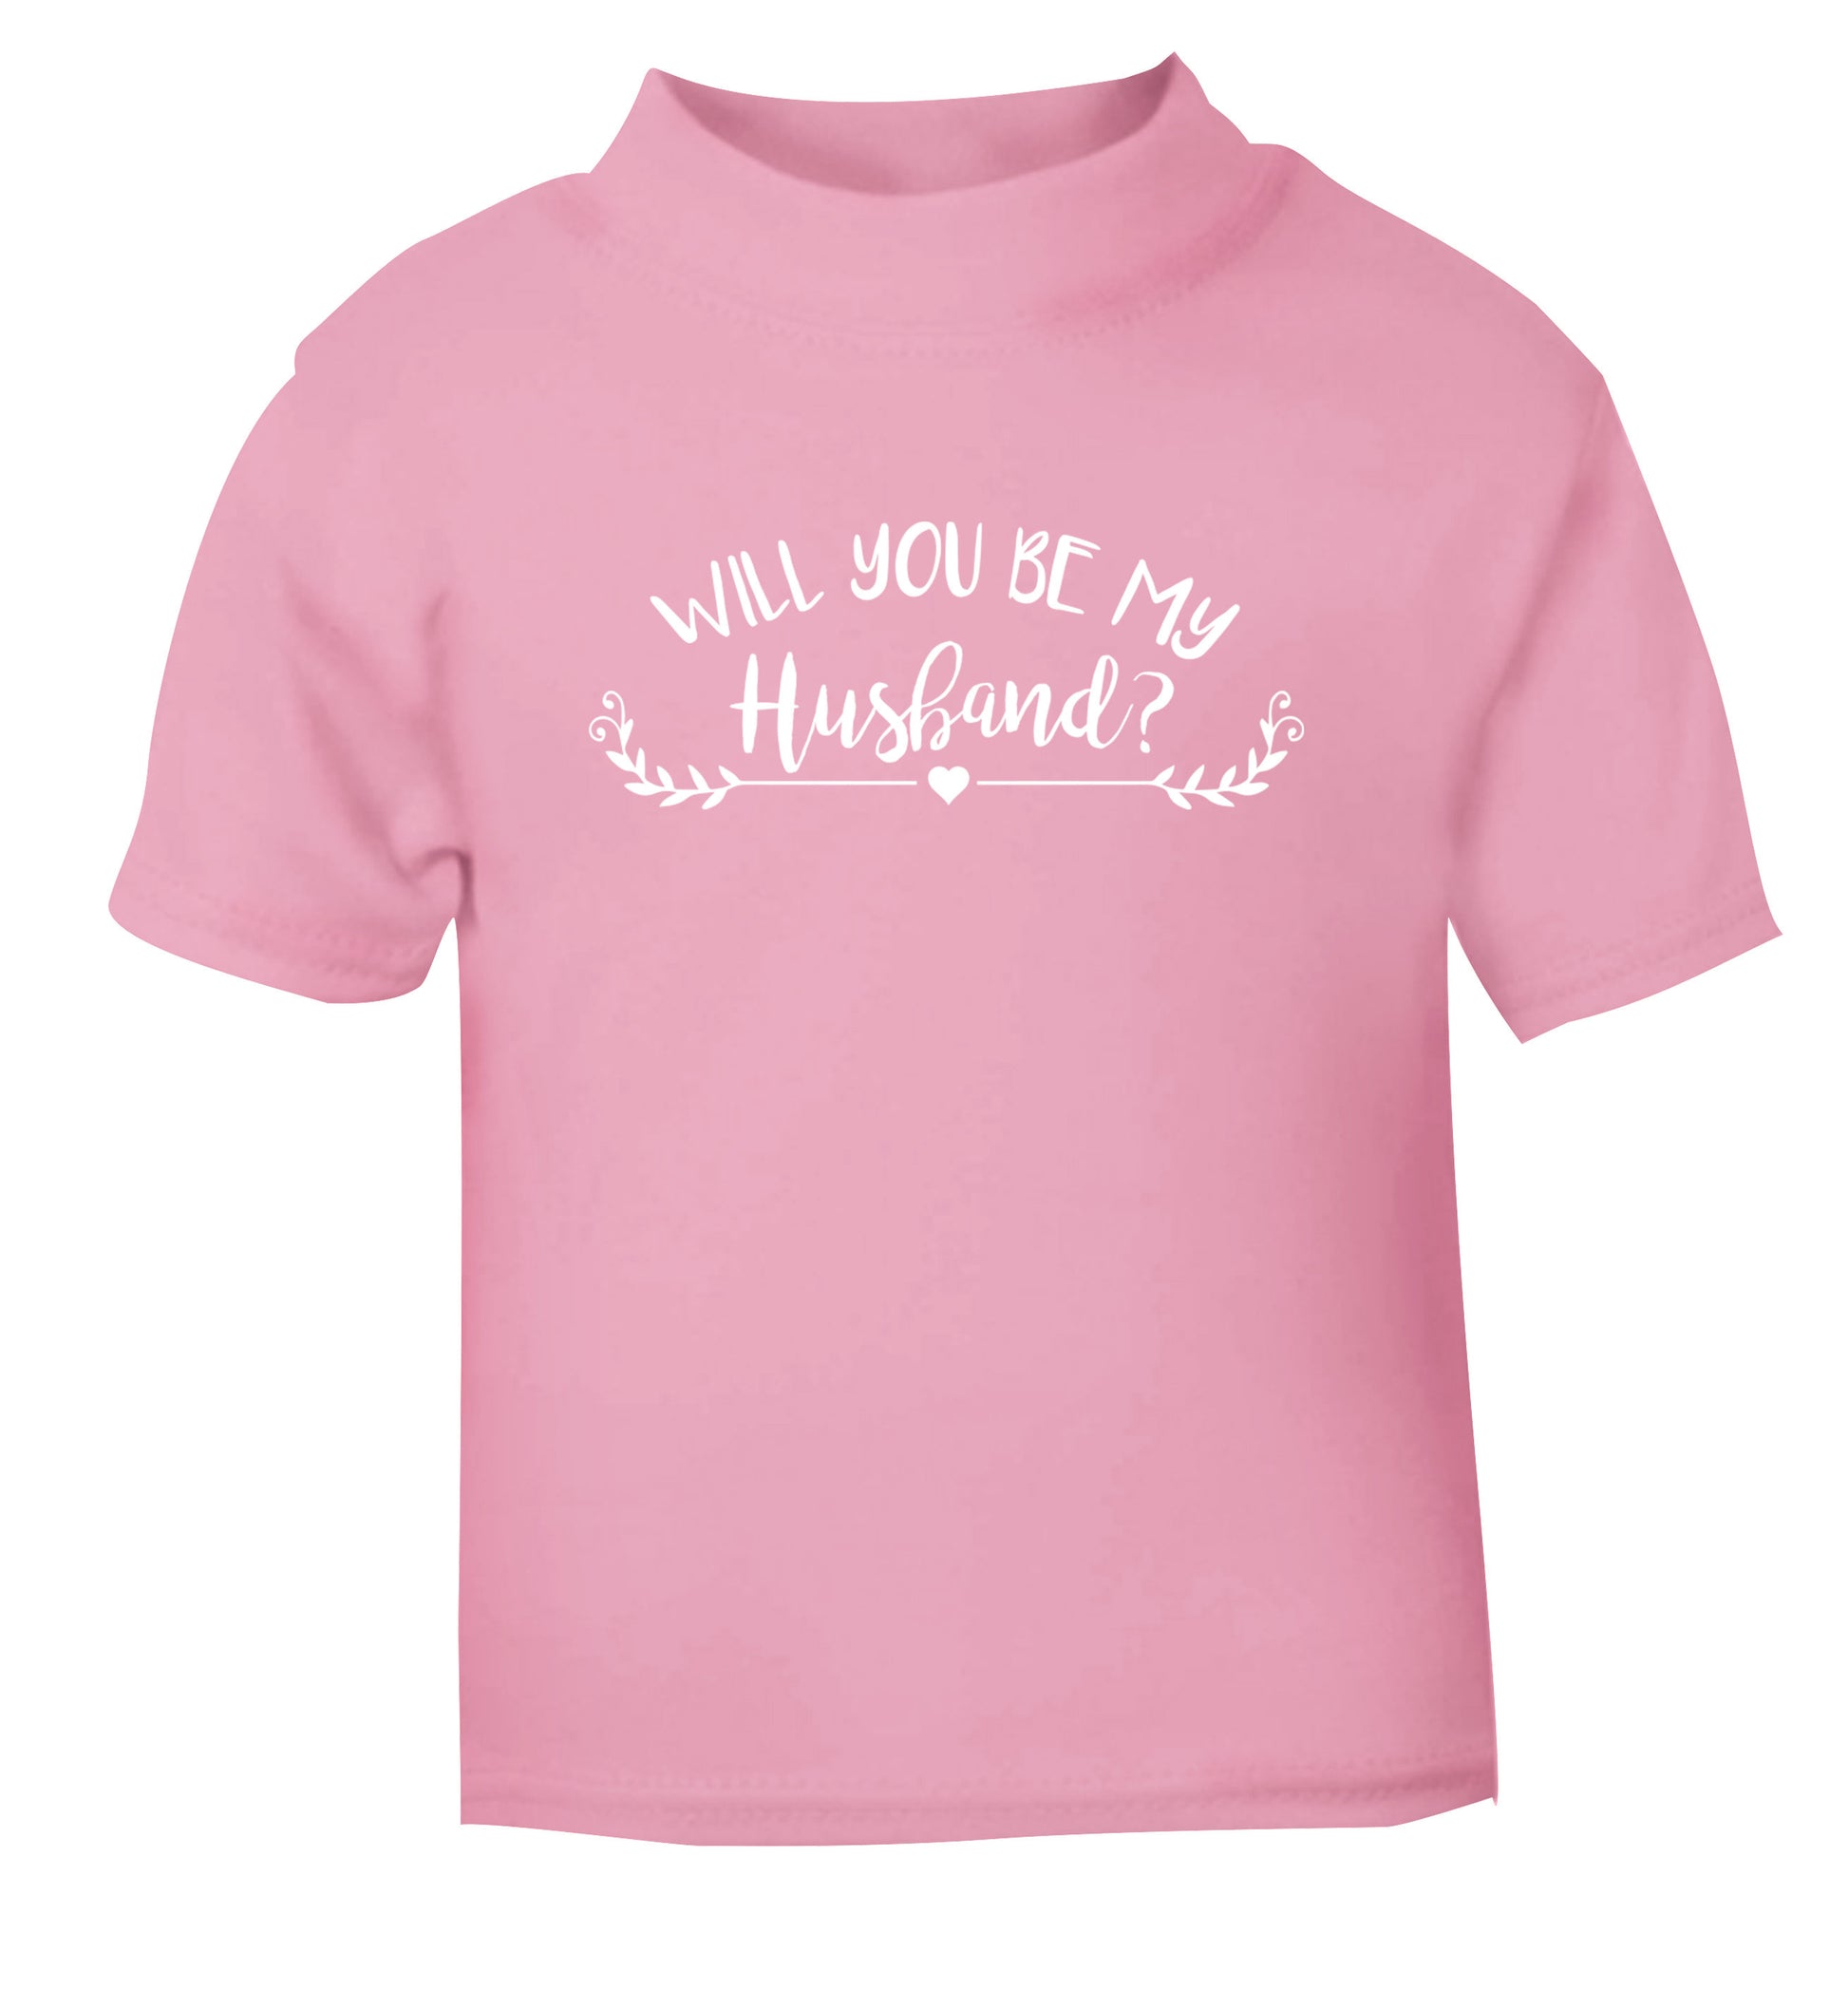 Will you be my husband? light pink Baby Toddler Tshirt 2 Years